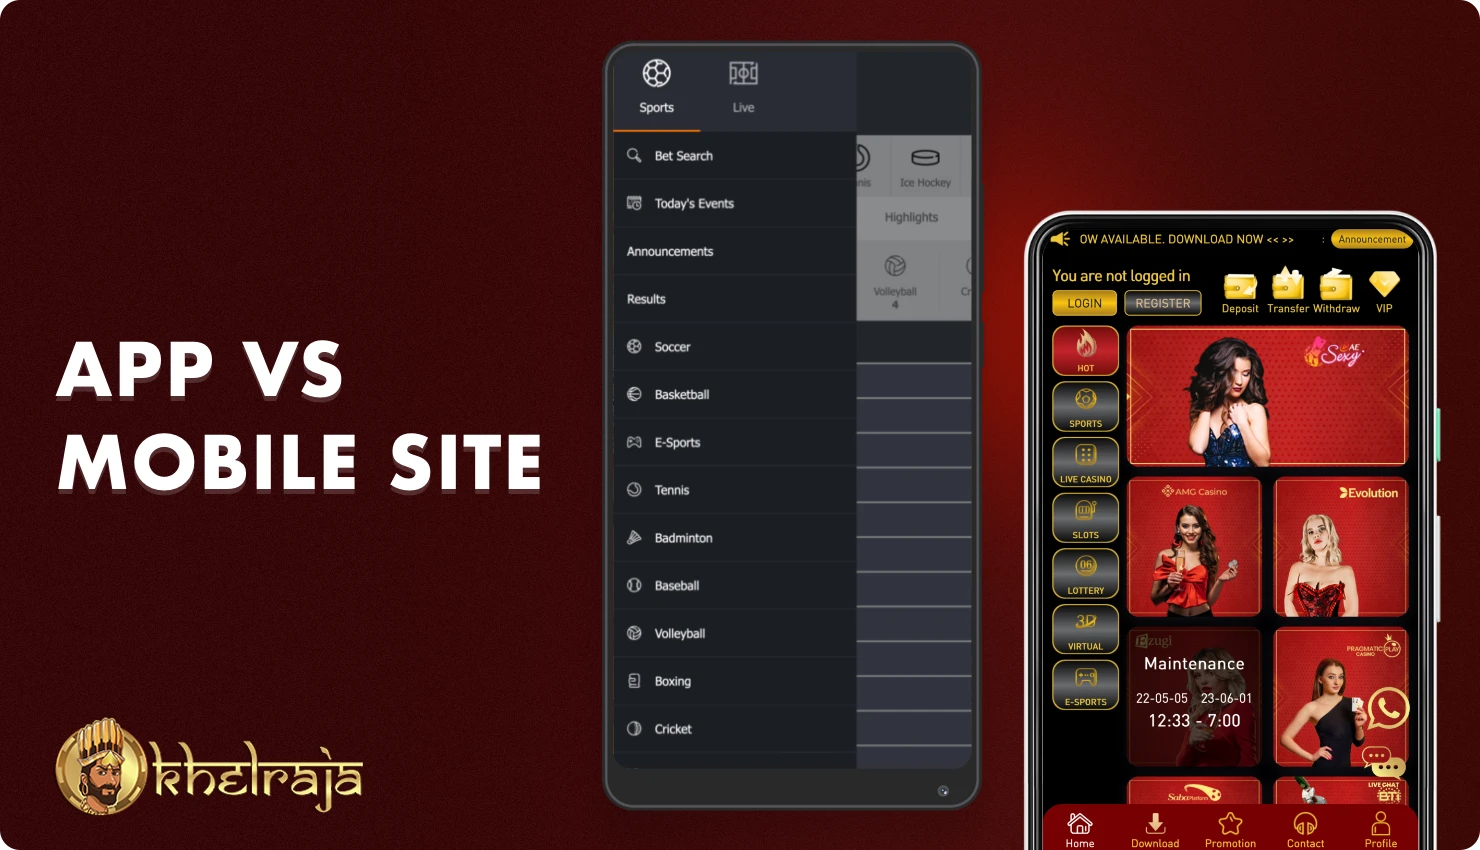 The mobile version of the website and the Khelraja app have a few minor differences